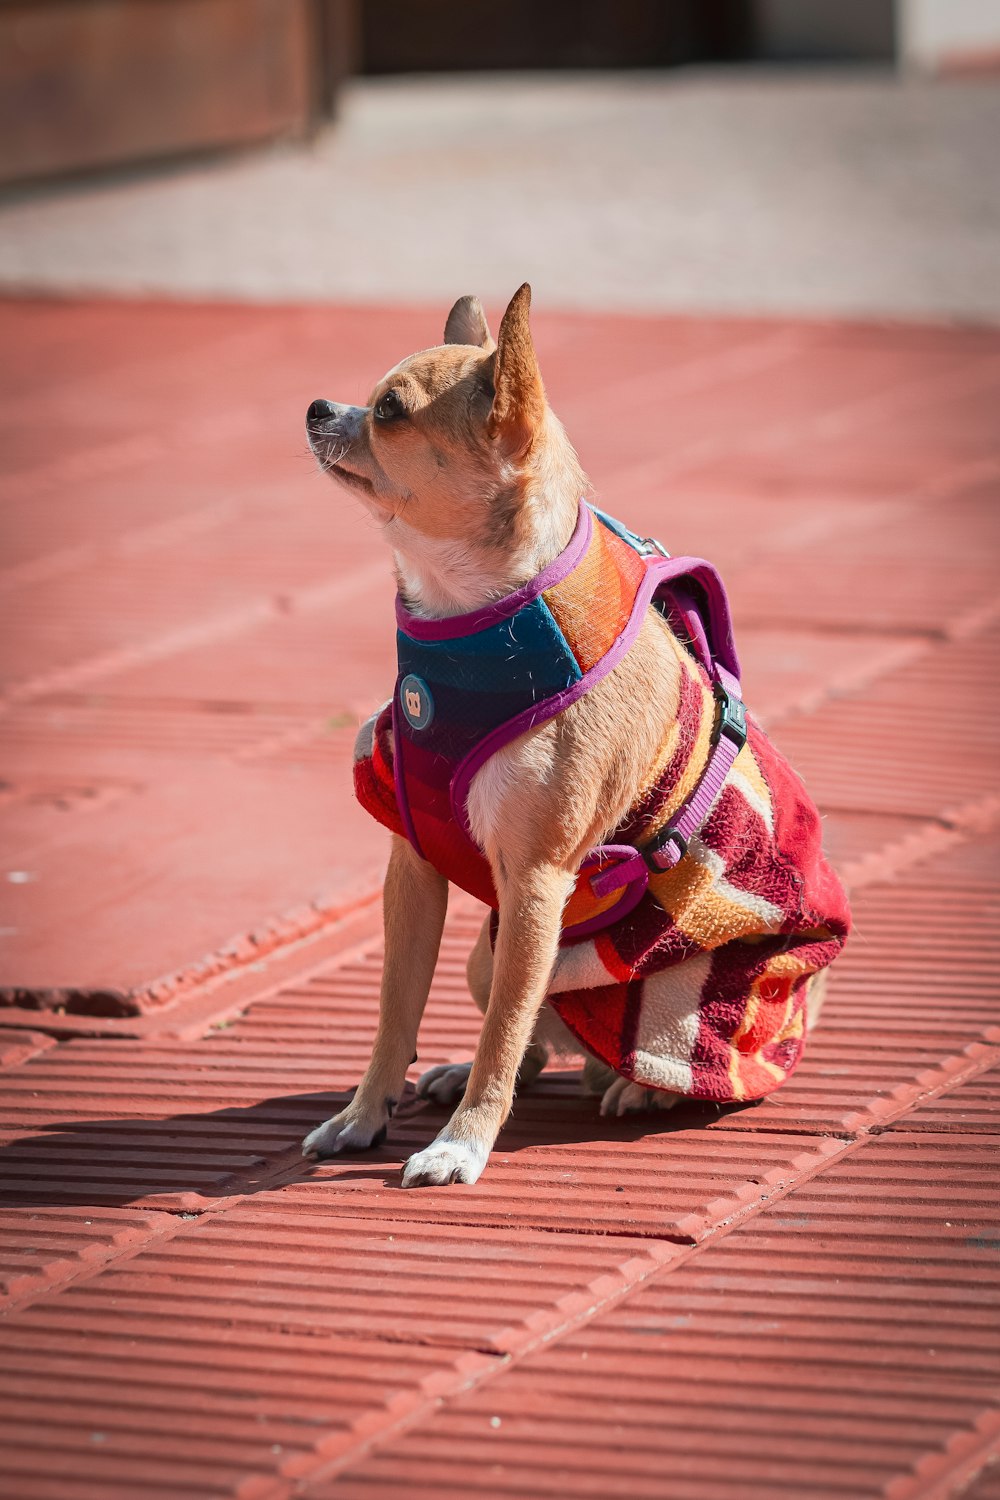 a small dog wearing a colorful outfit sitting on the ground